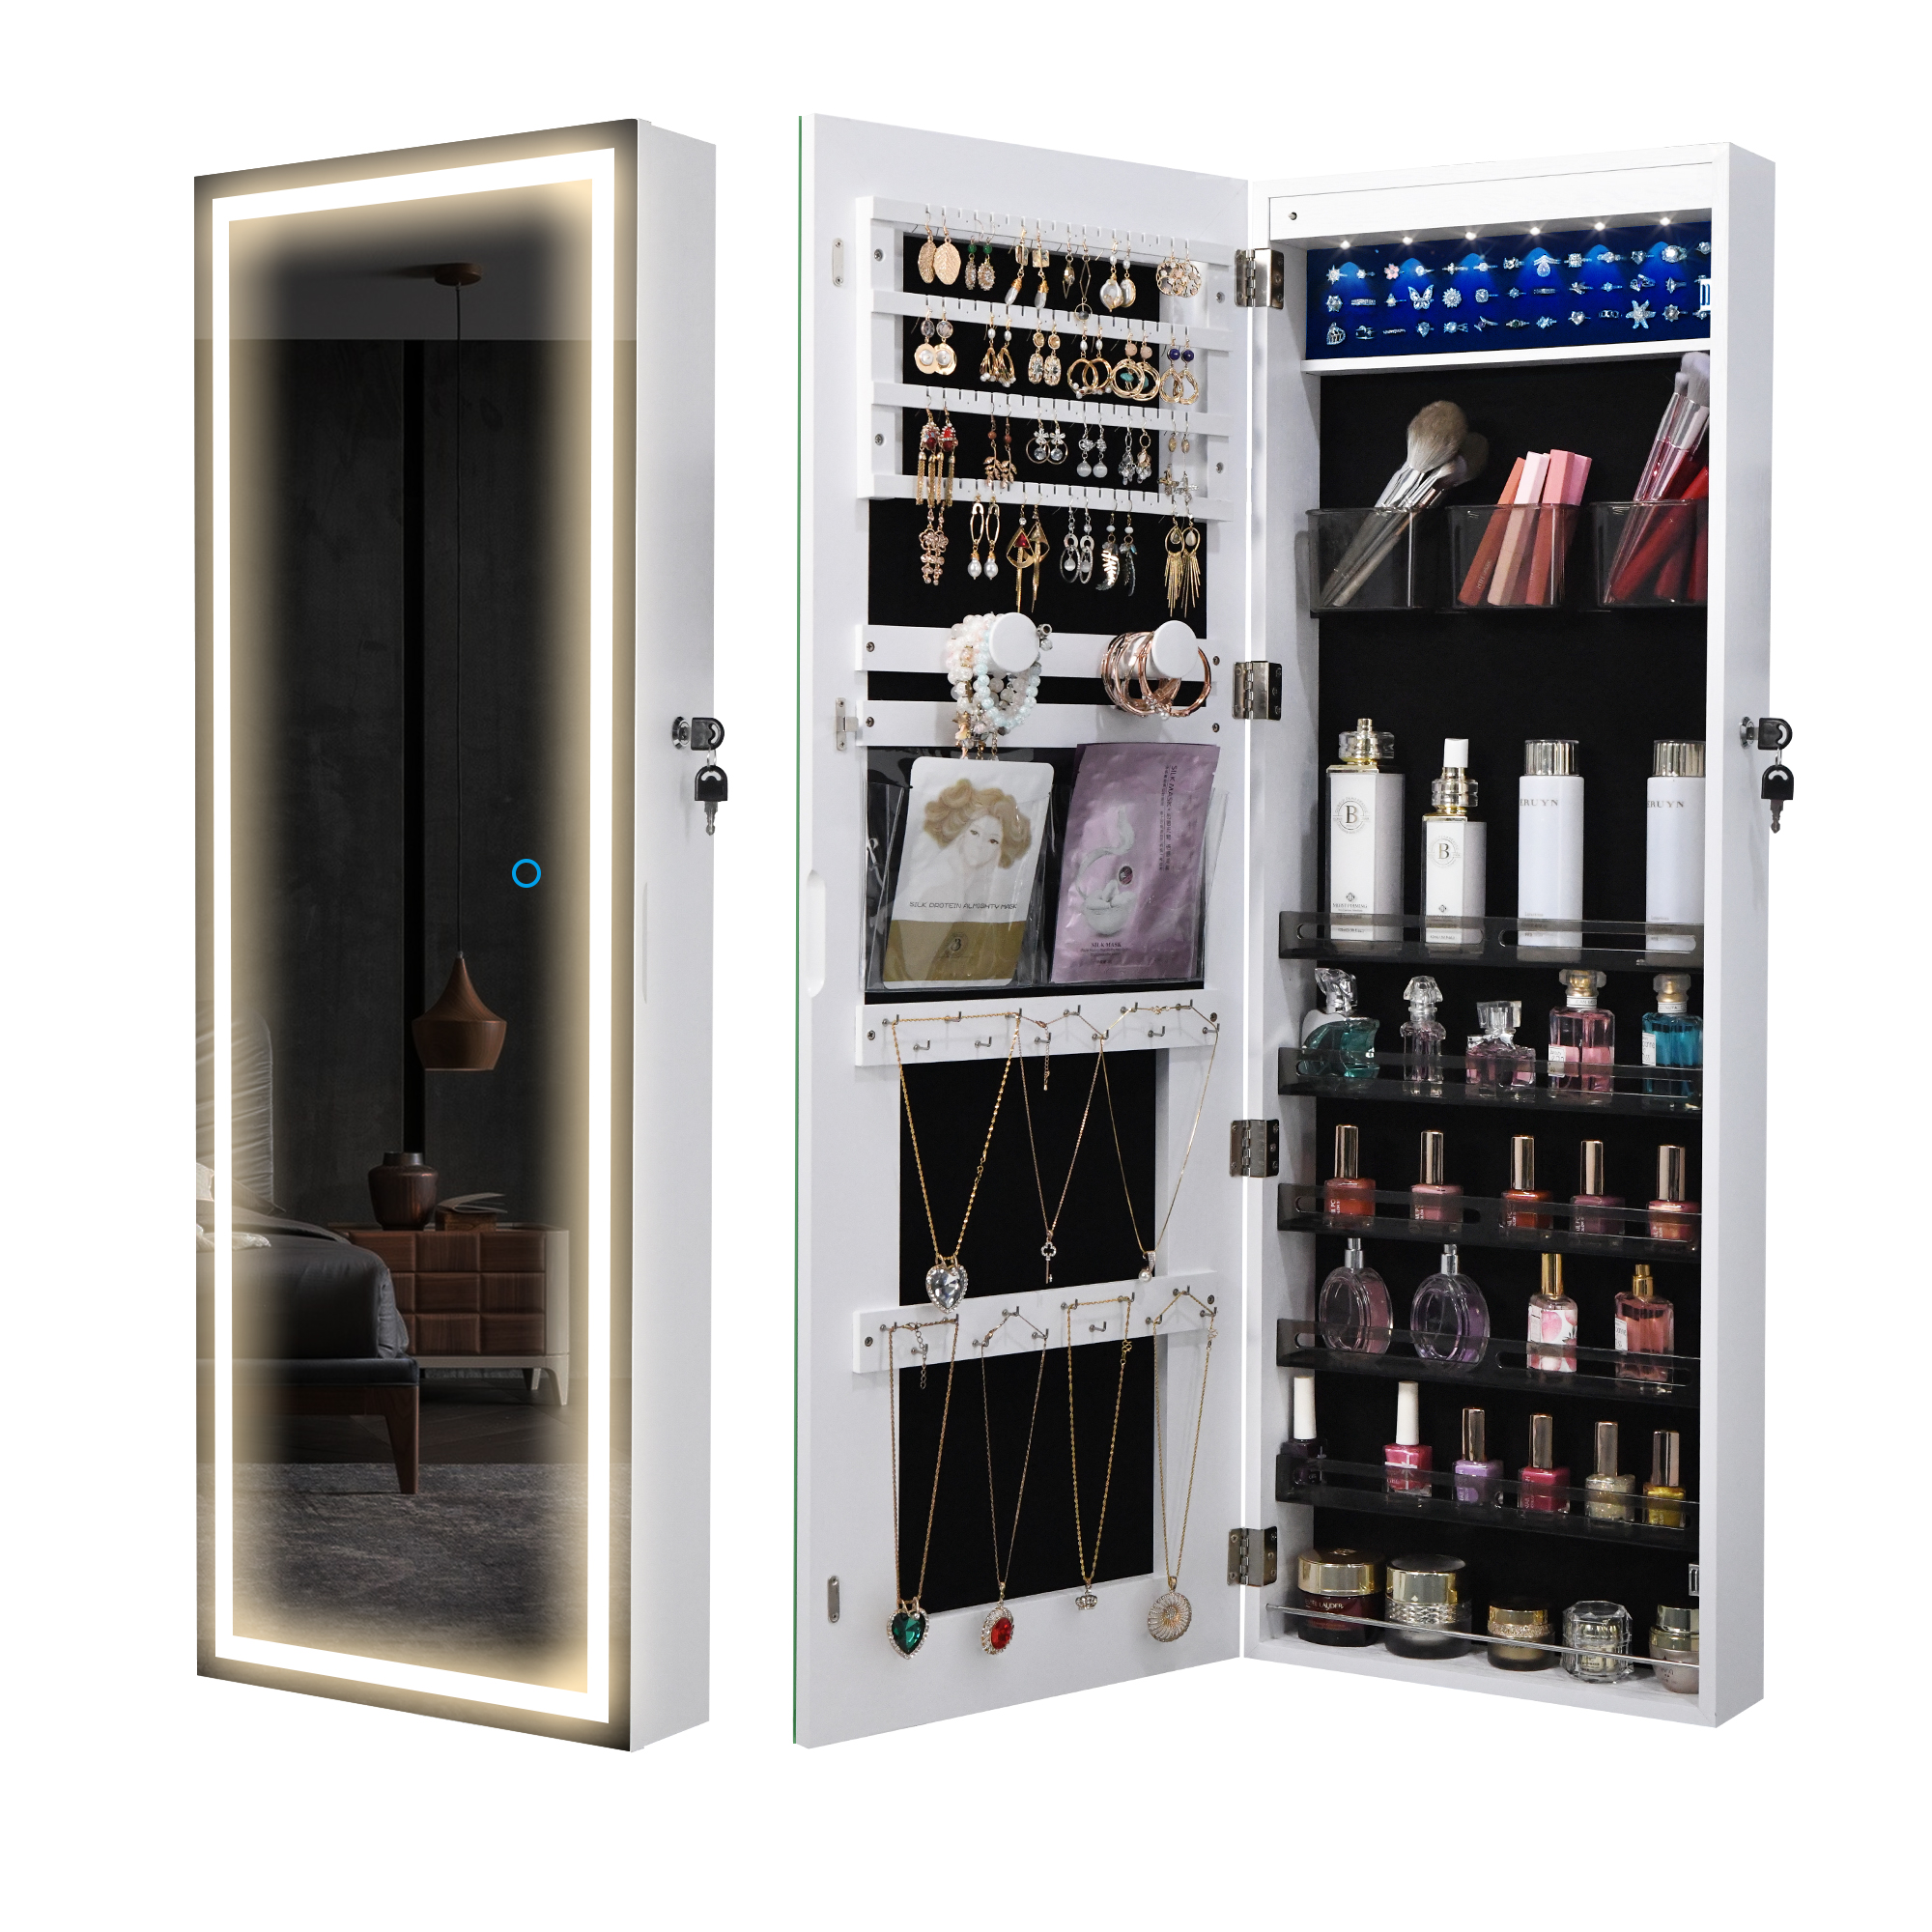 LVSOMT LED White Wall/Door+Jewelry Cabinet